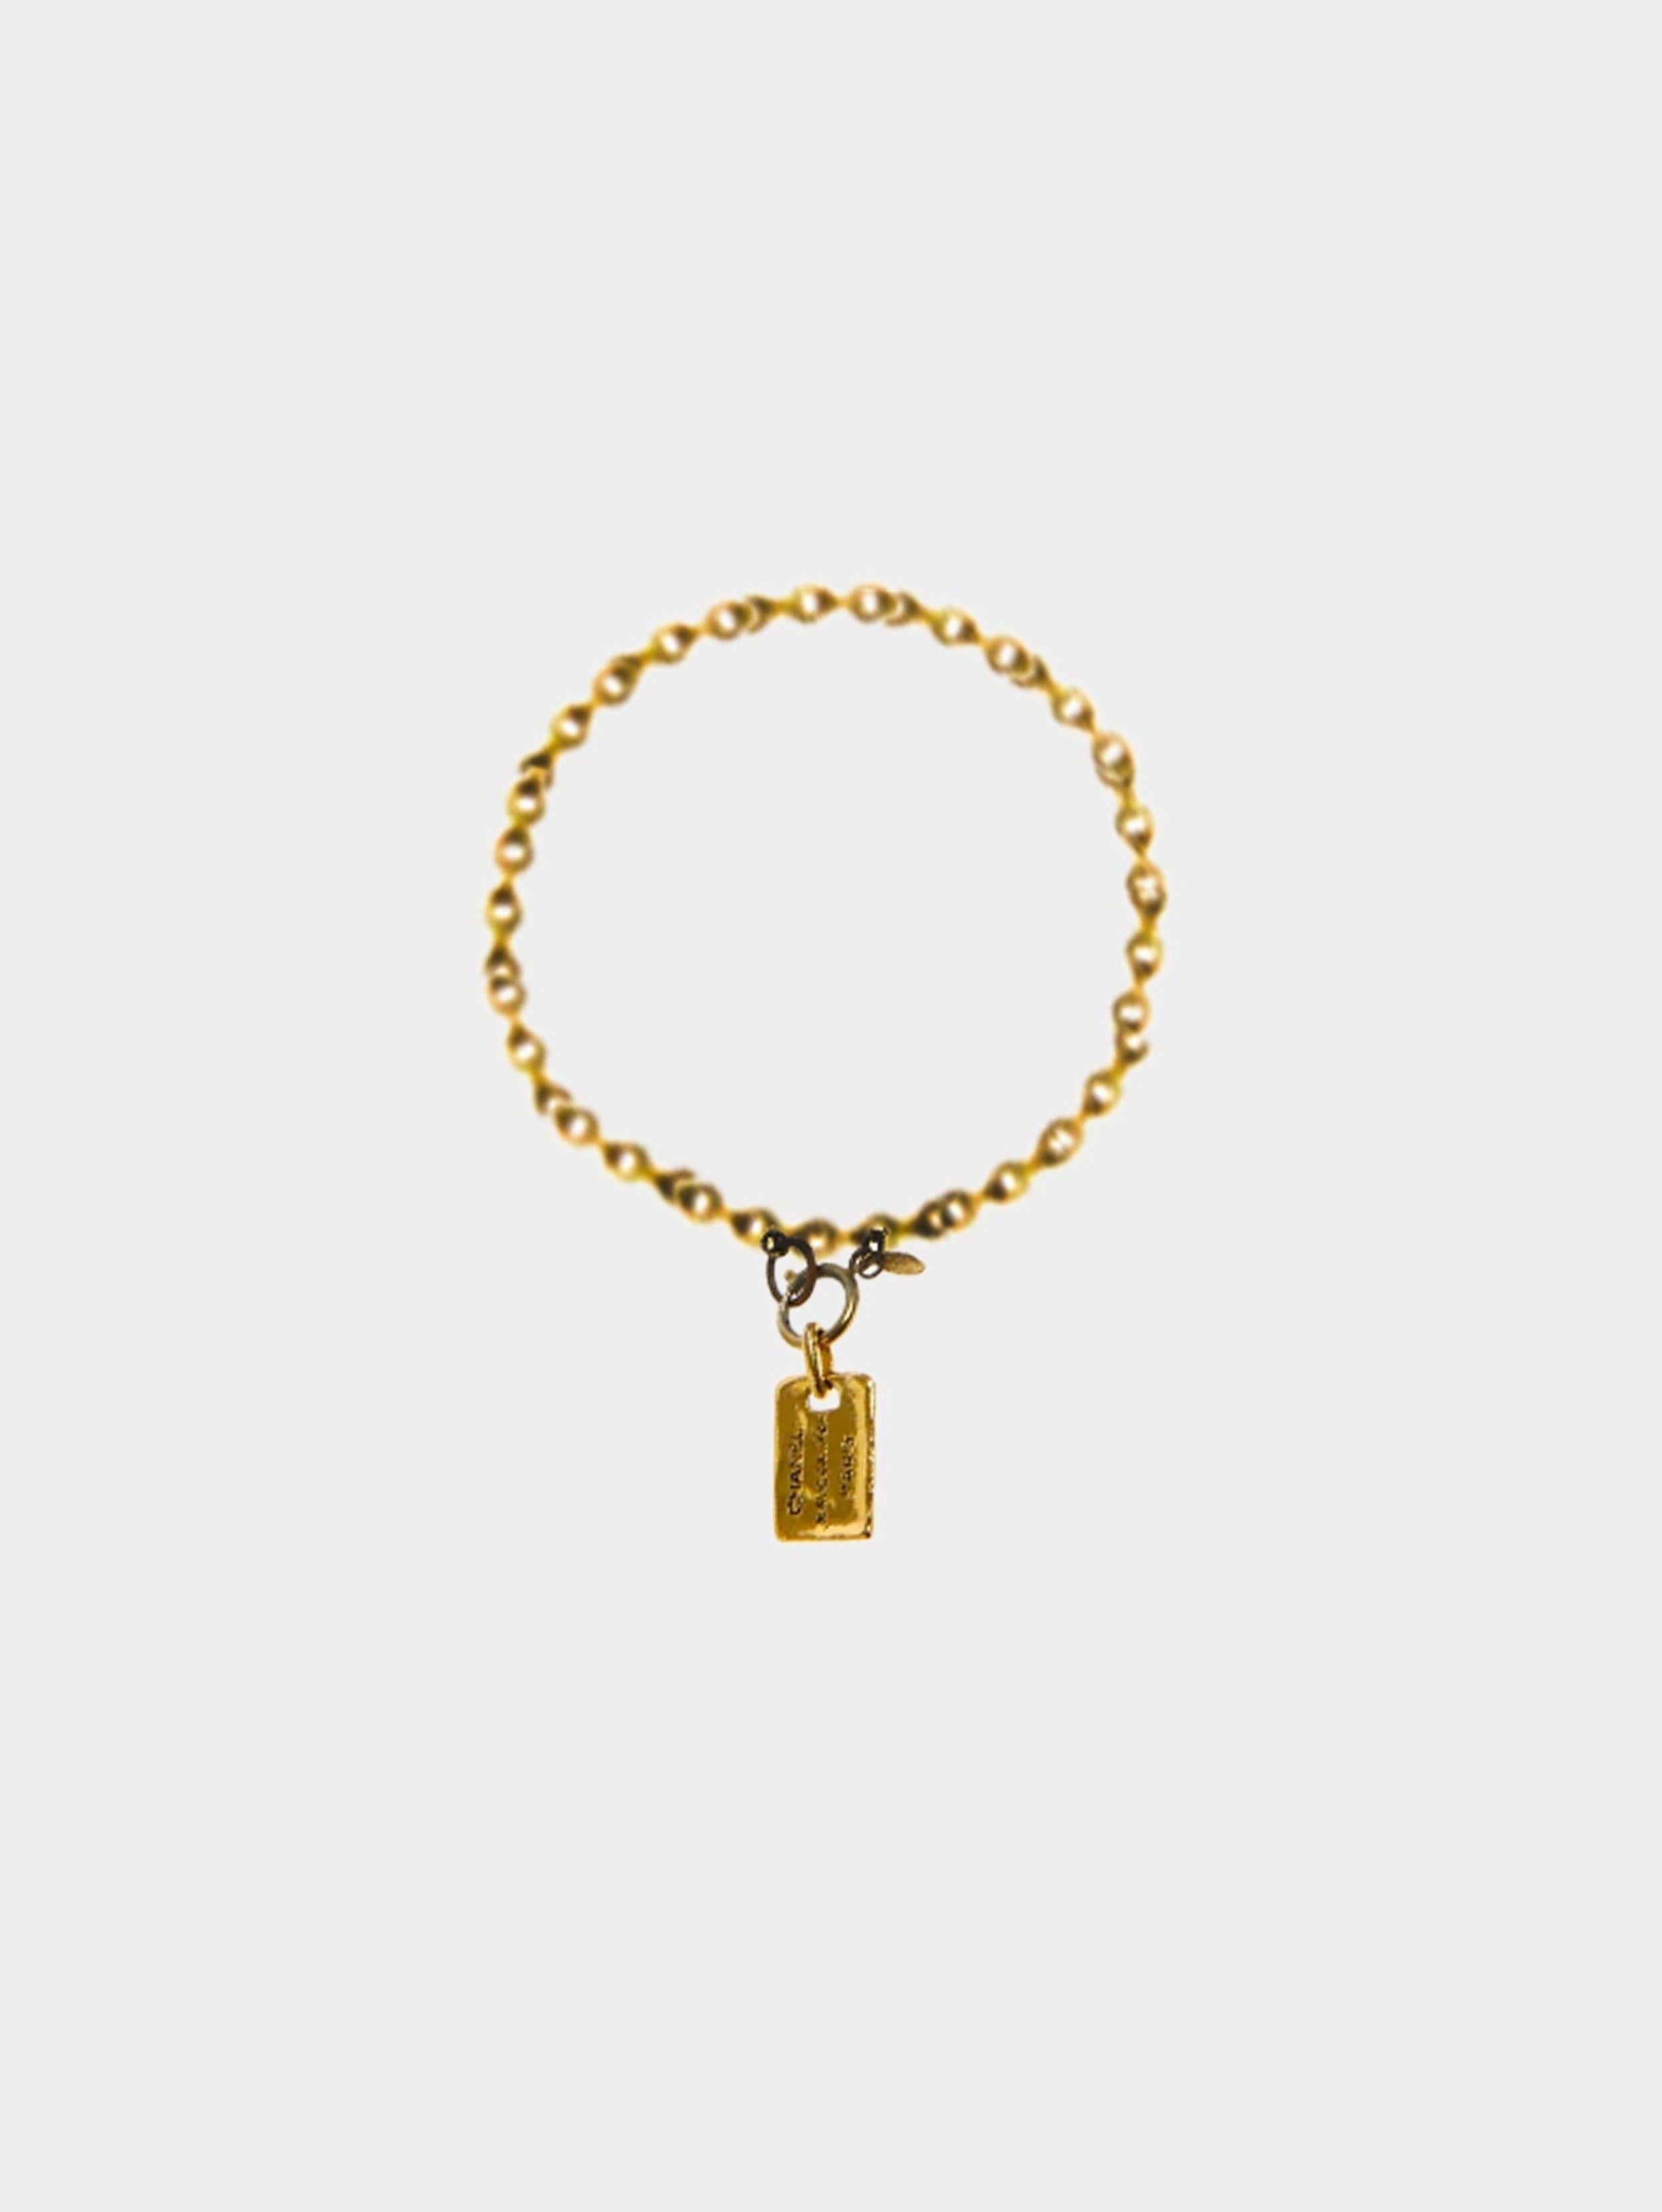 Chanel 1994 Logo Gold Plated Dog Tag Necklace